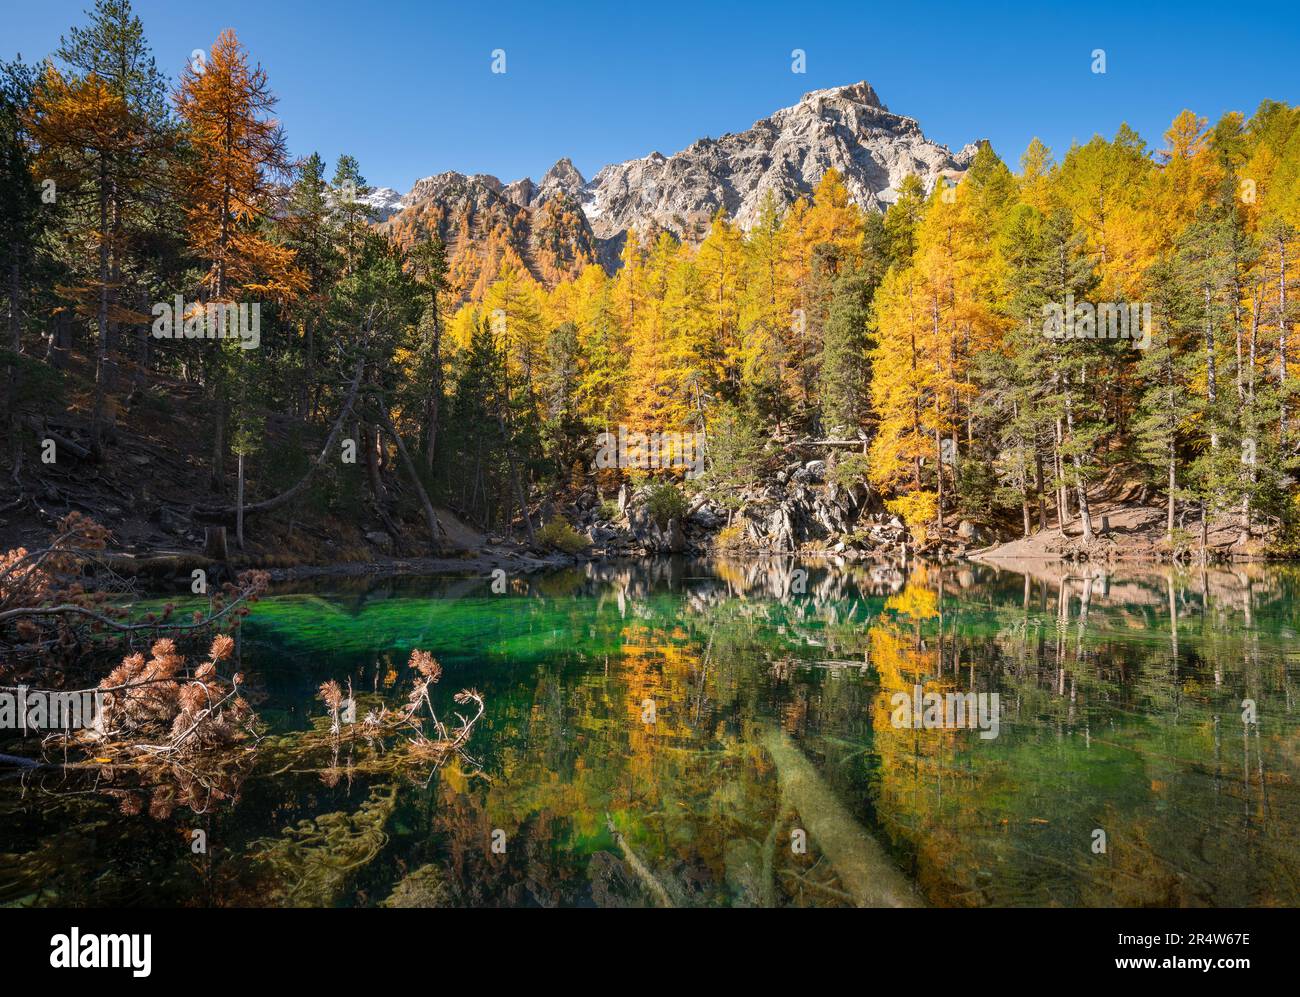 French Alps. Green Lake surounded by larch trees in Autumn. Narrow Valley, Hautes-Alpes, European Alps, France Stock Photo